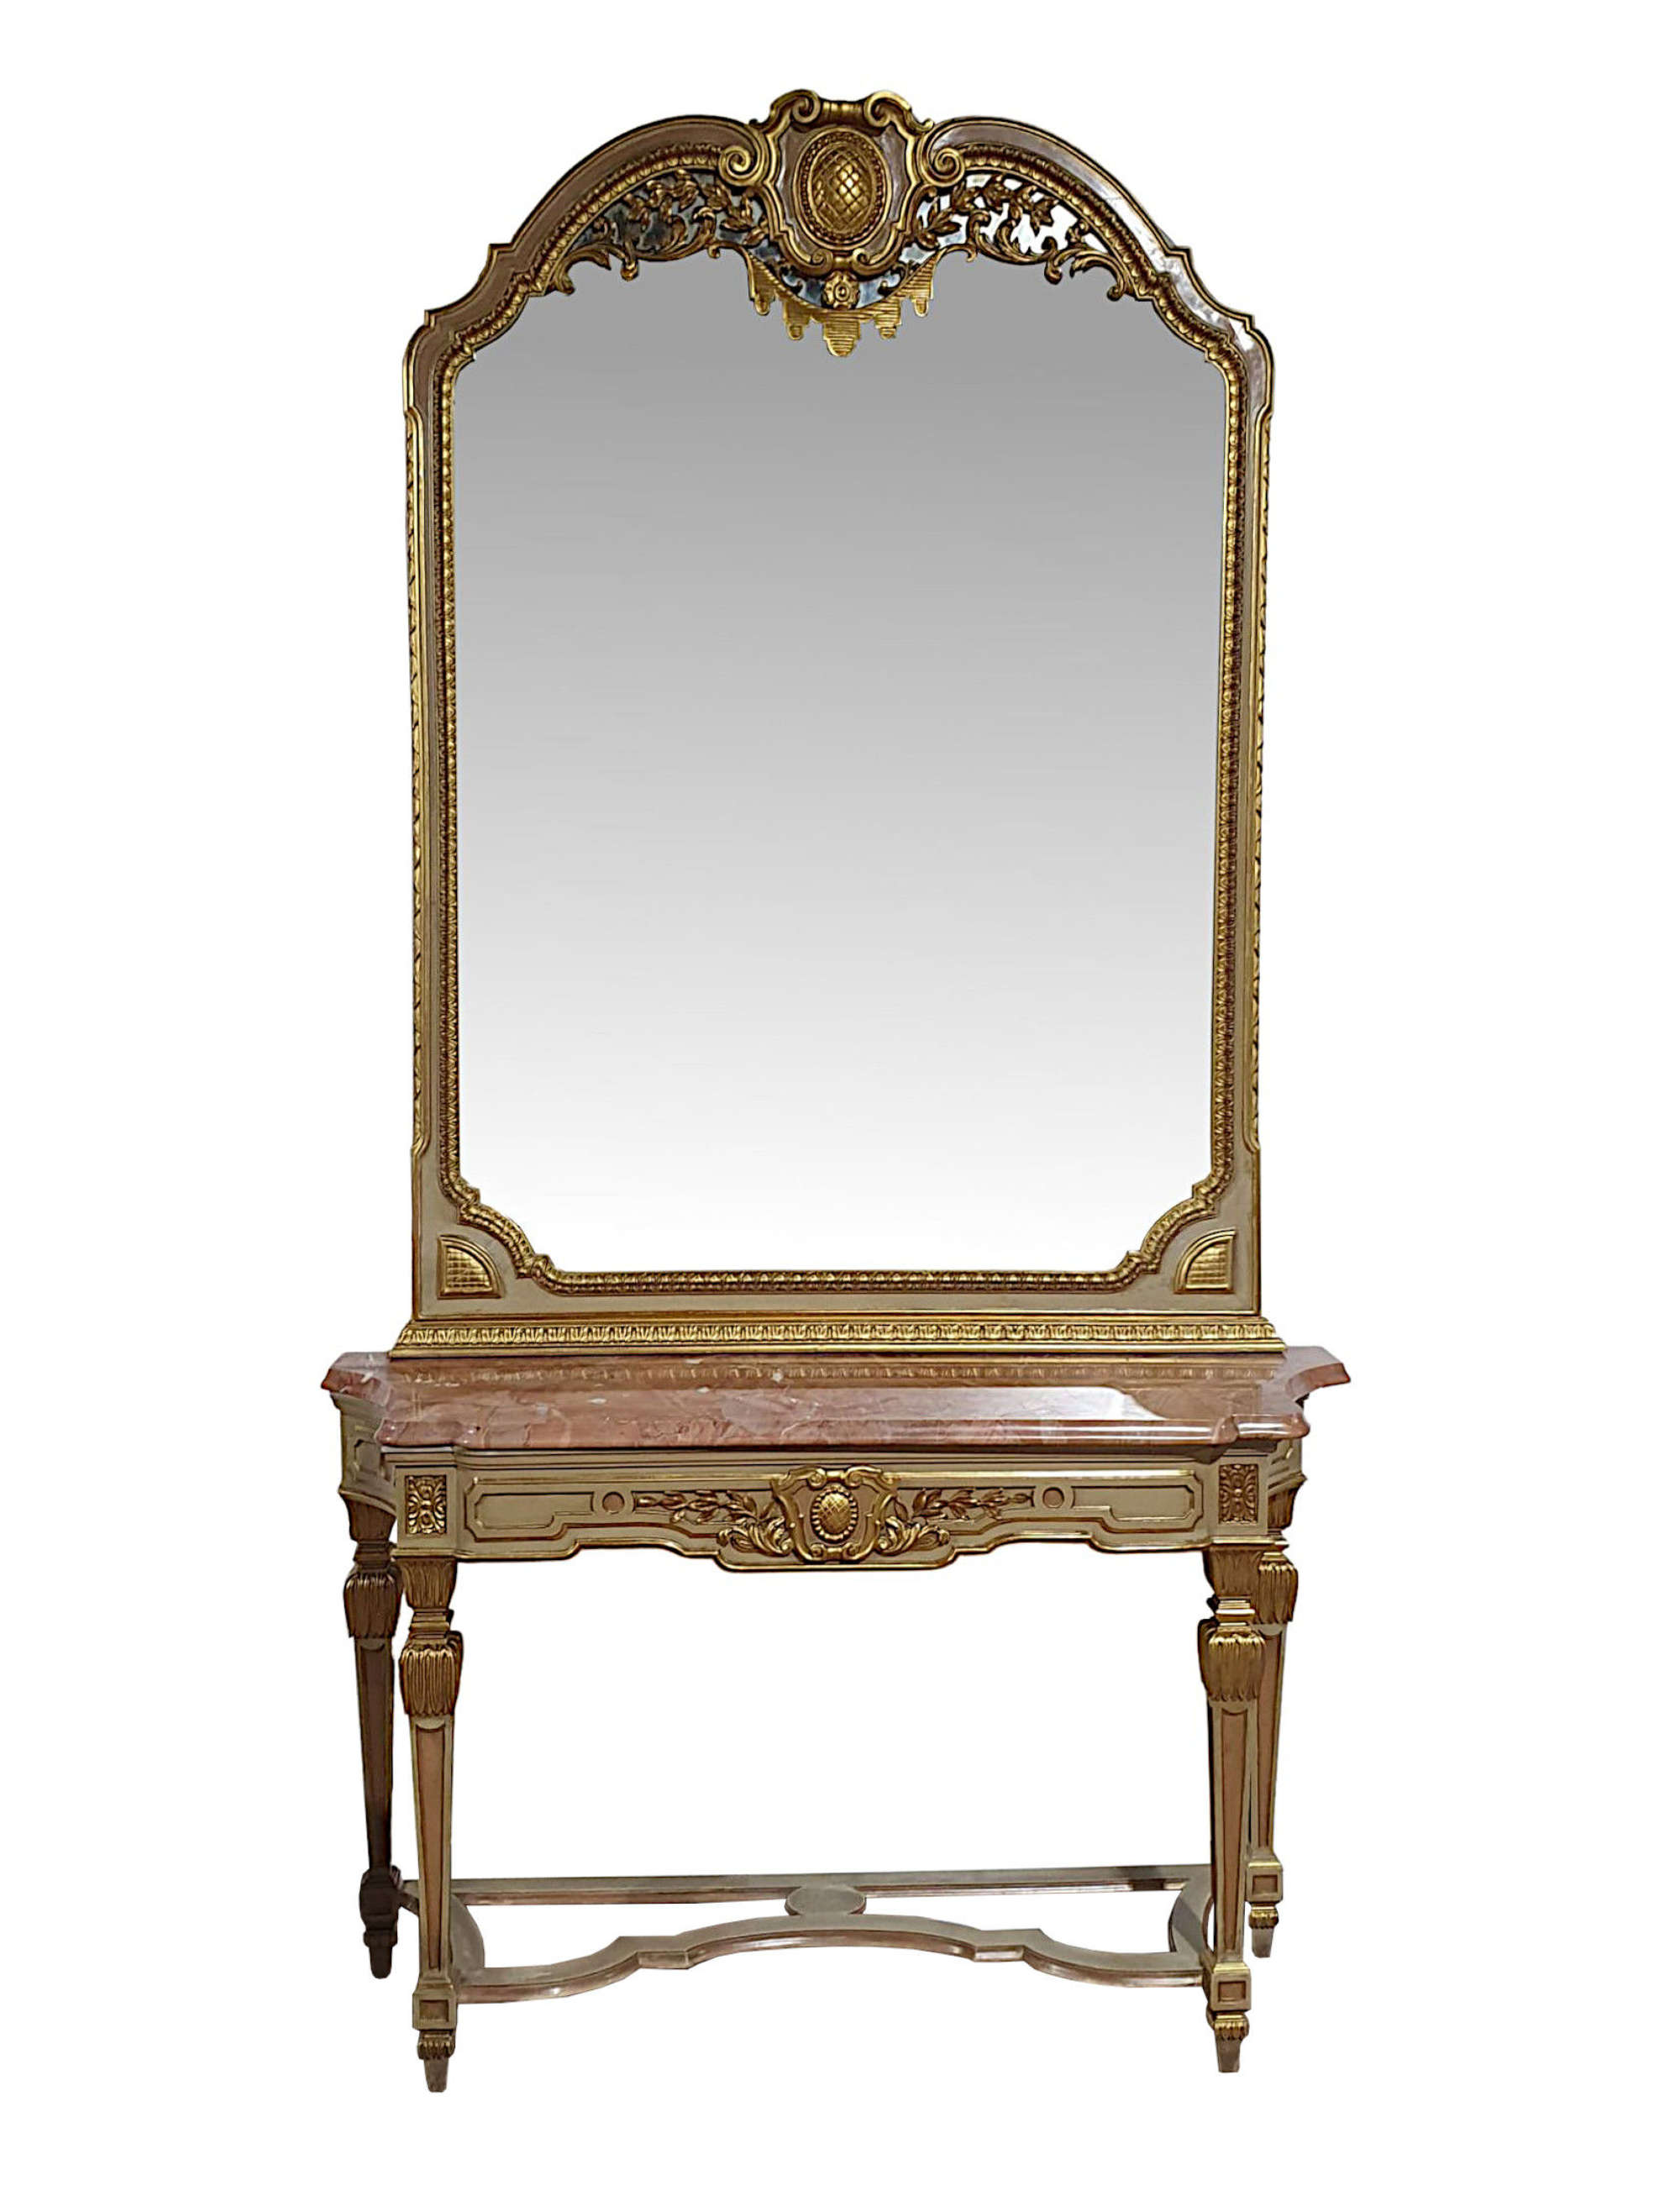 A Fine Early 20th Century Parcel Gilt Marble Top Console Table and Mirror